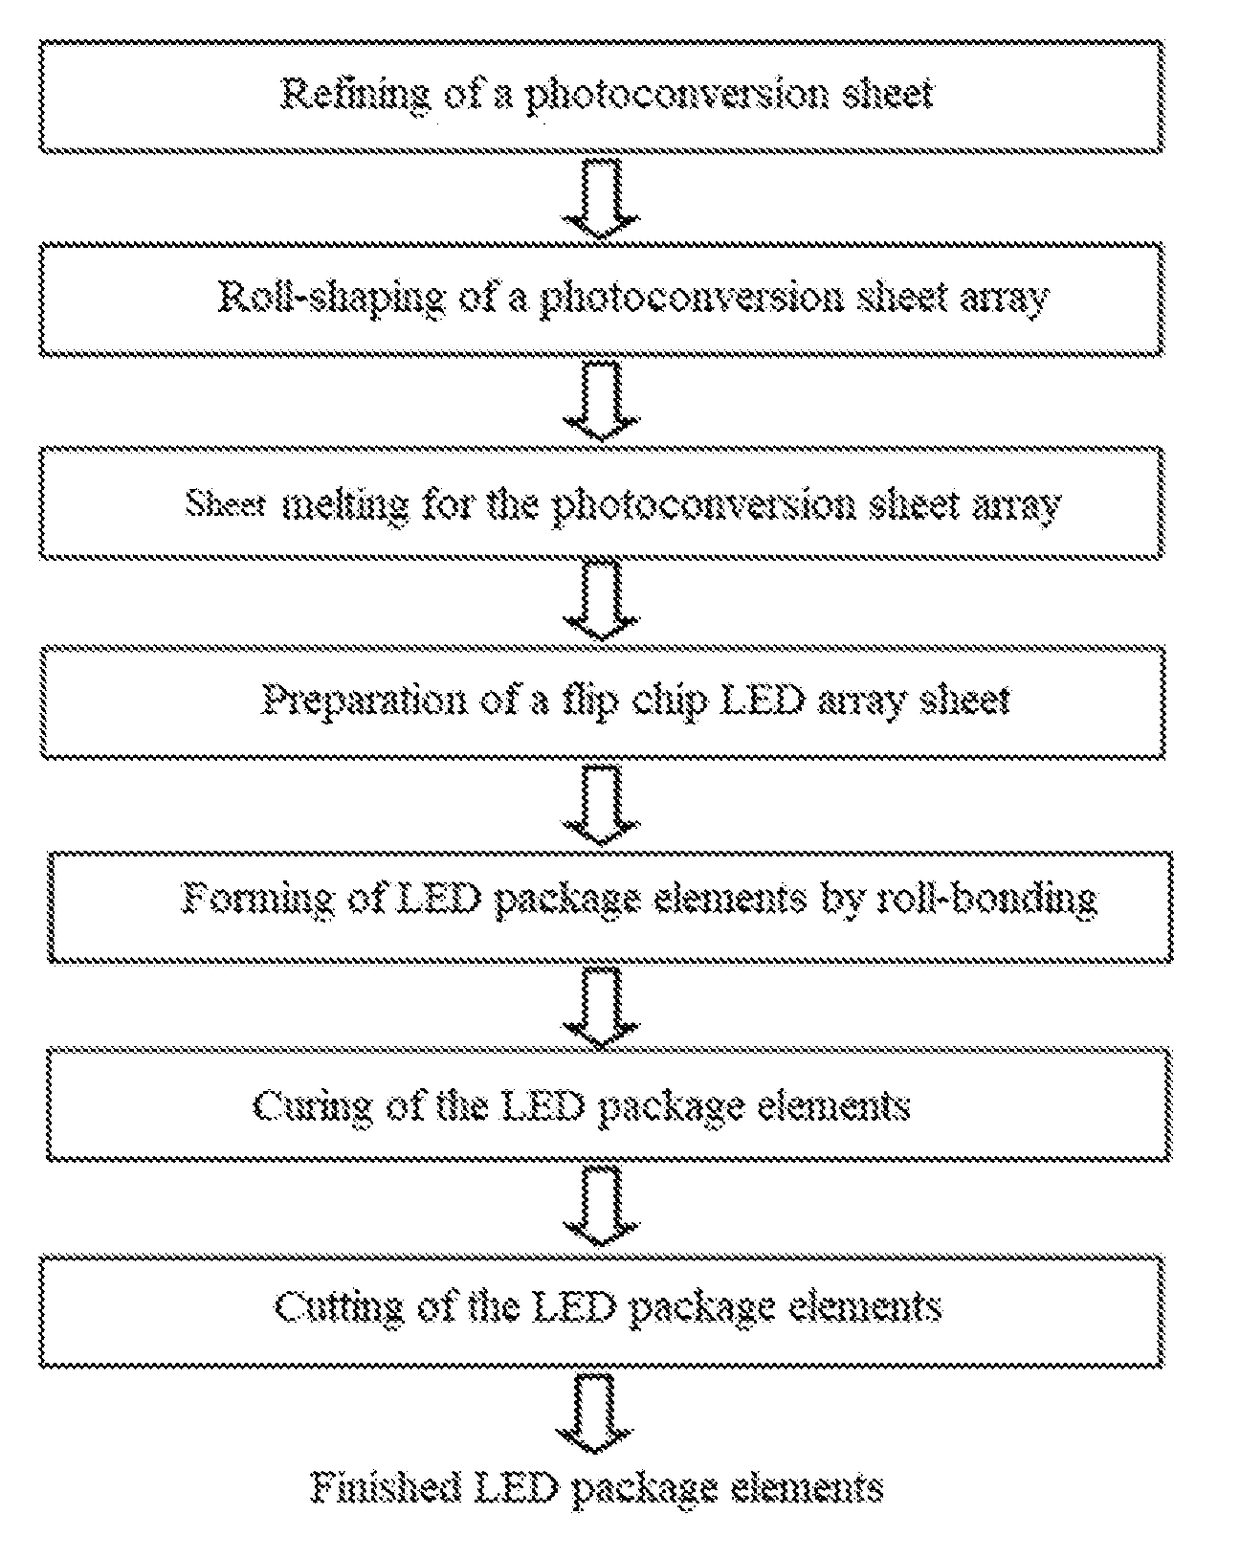 Process Method Using Deformable Organic Silicone Resin Photoconverter to Bond-Package Led